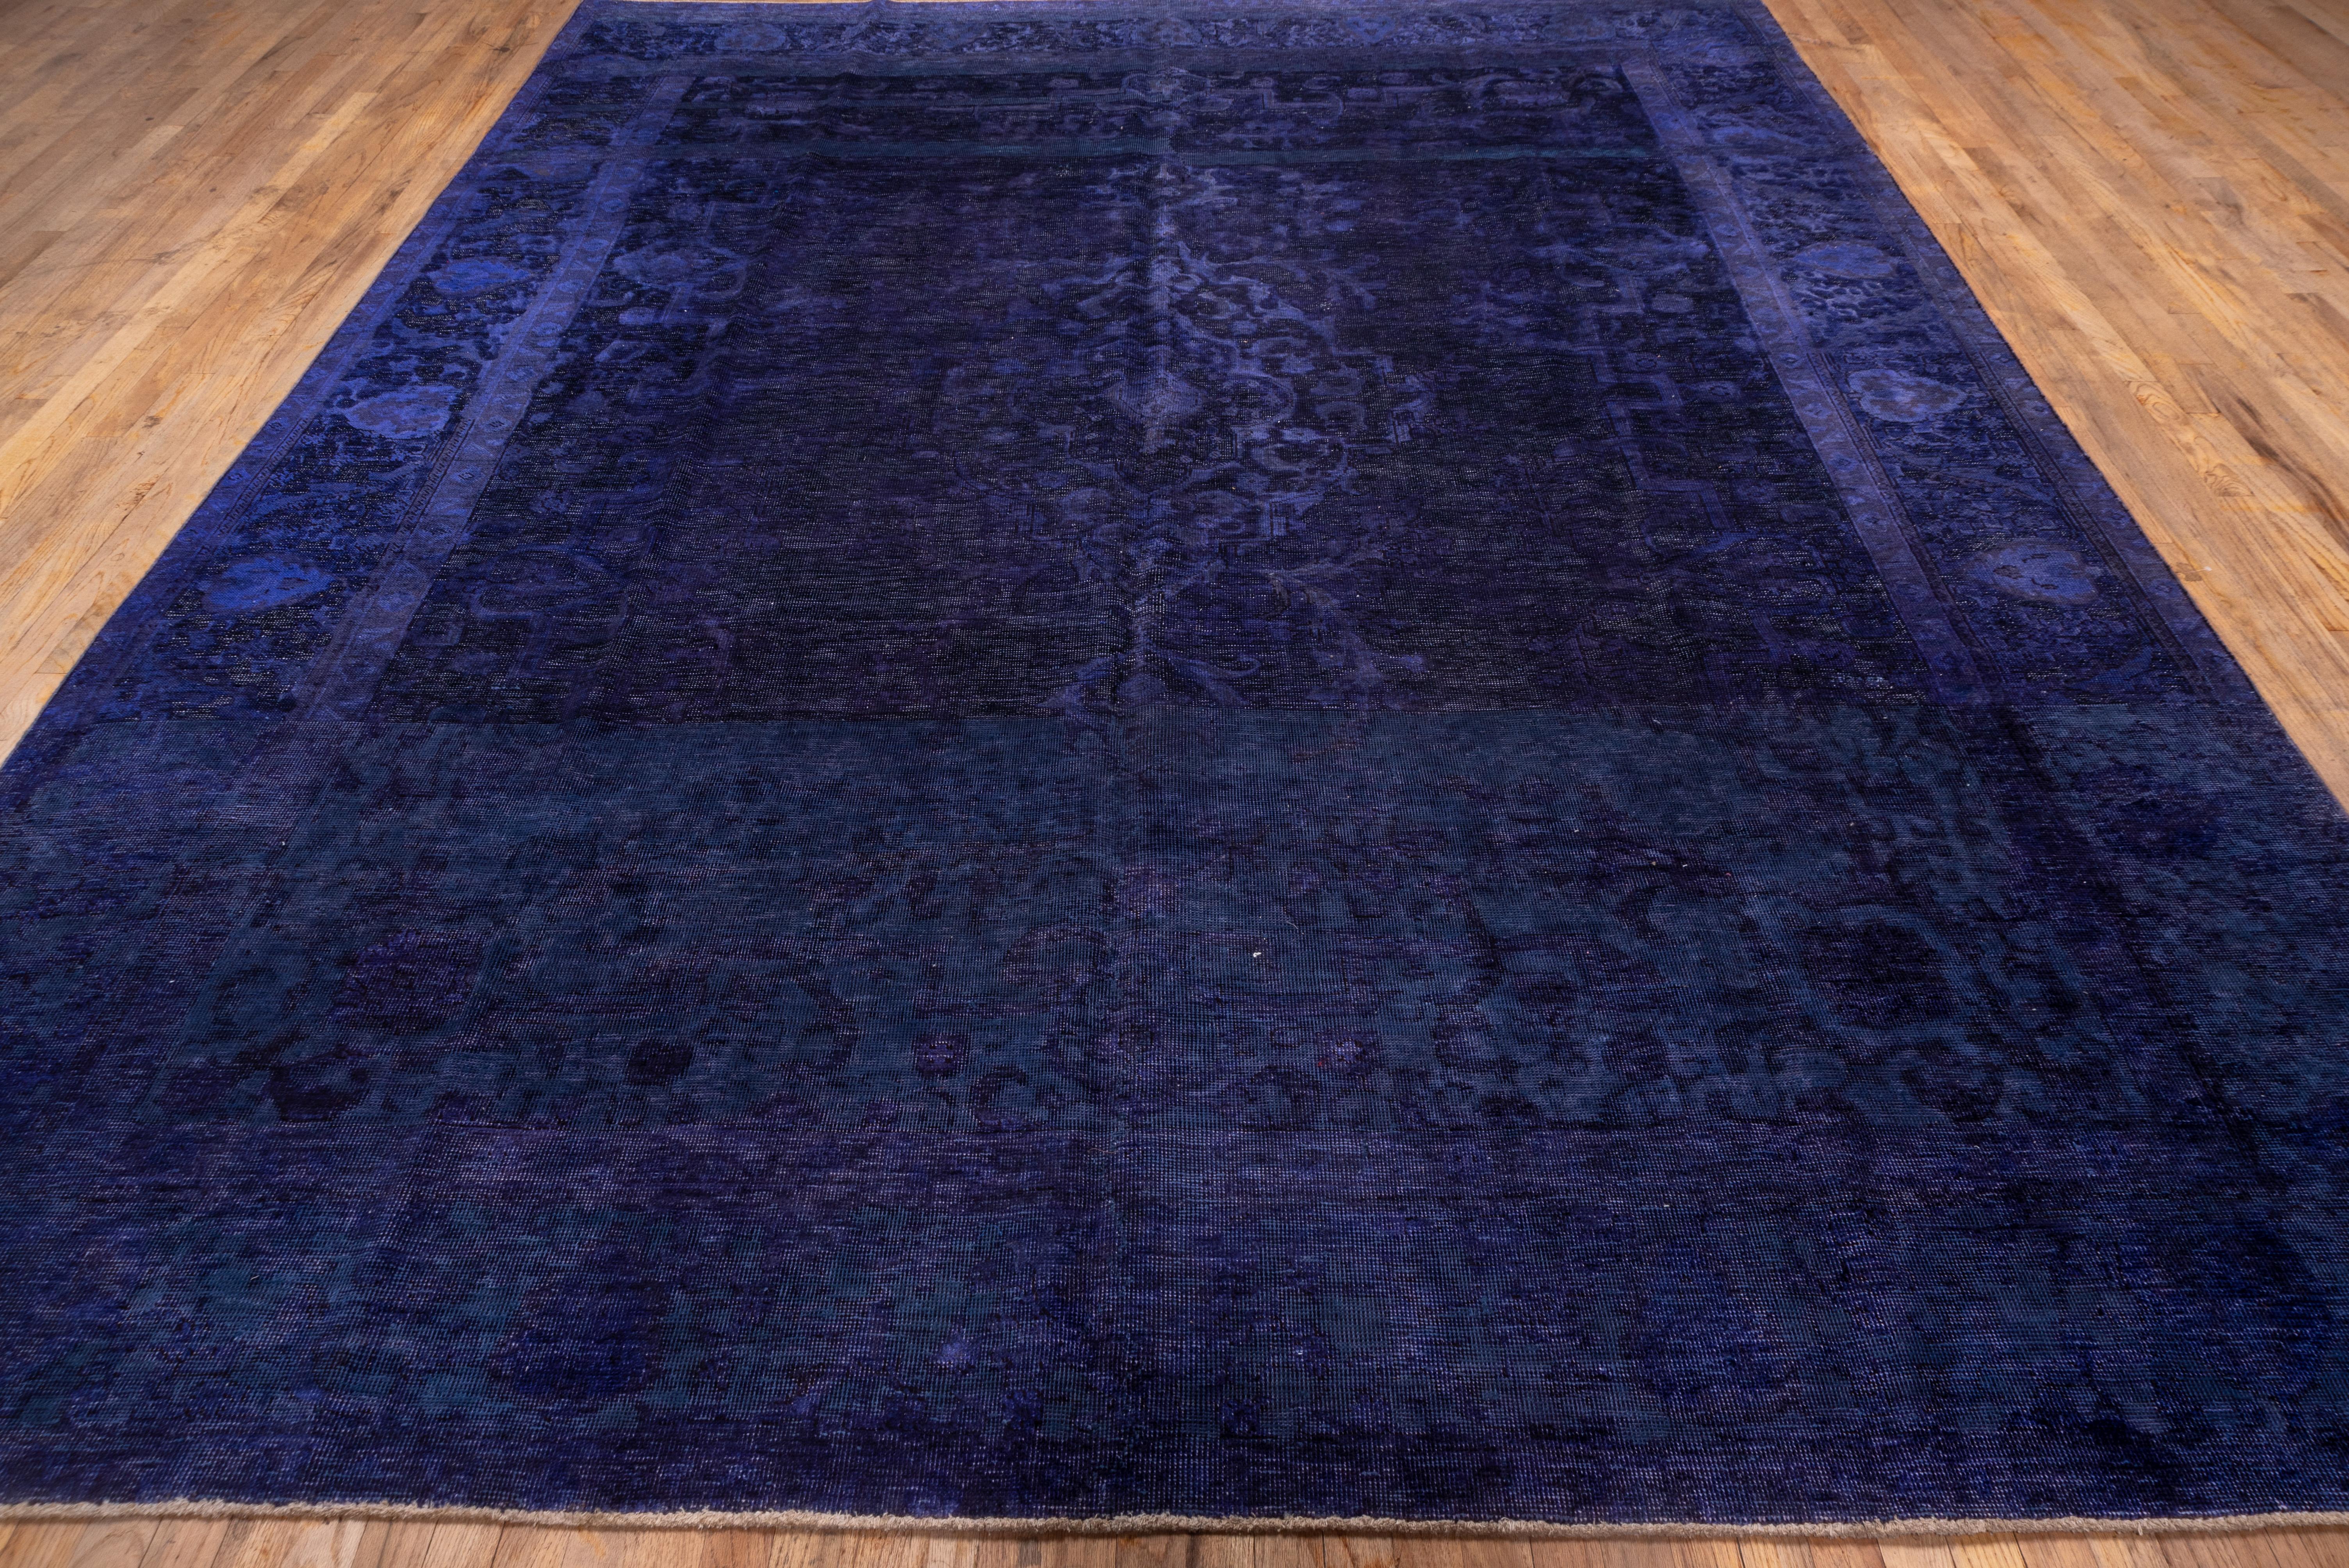 A crisp, saturated purple overdye on a palmette patterned carpet with additional palmetes in the bord. Pile flat to uniformly distressed, medium weave, cotton foundation. Overdye dominates pattern here. Great way to make a splash in a room that